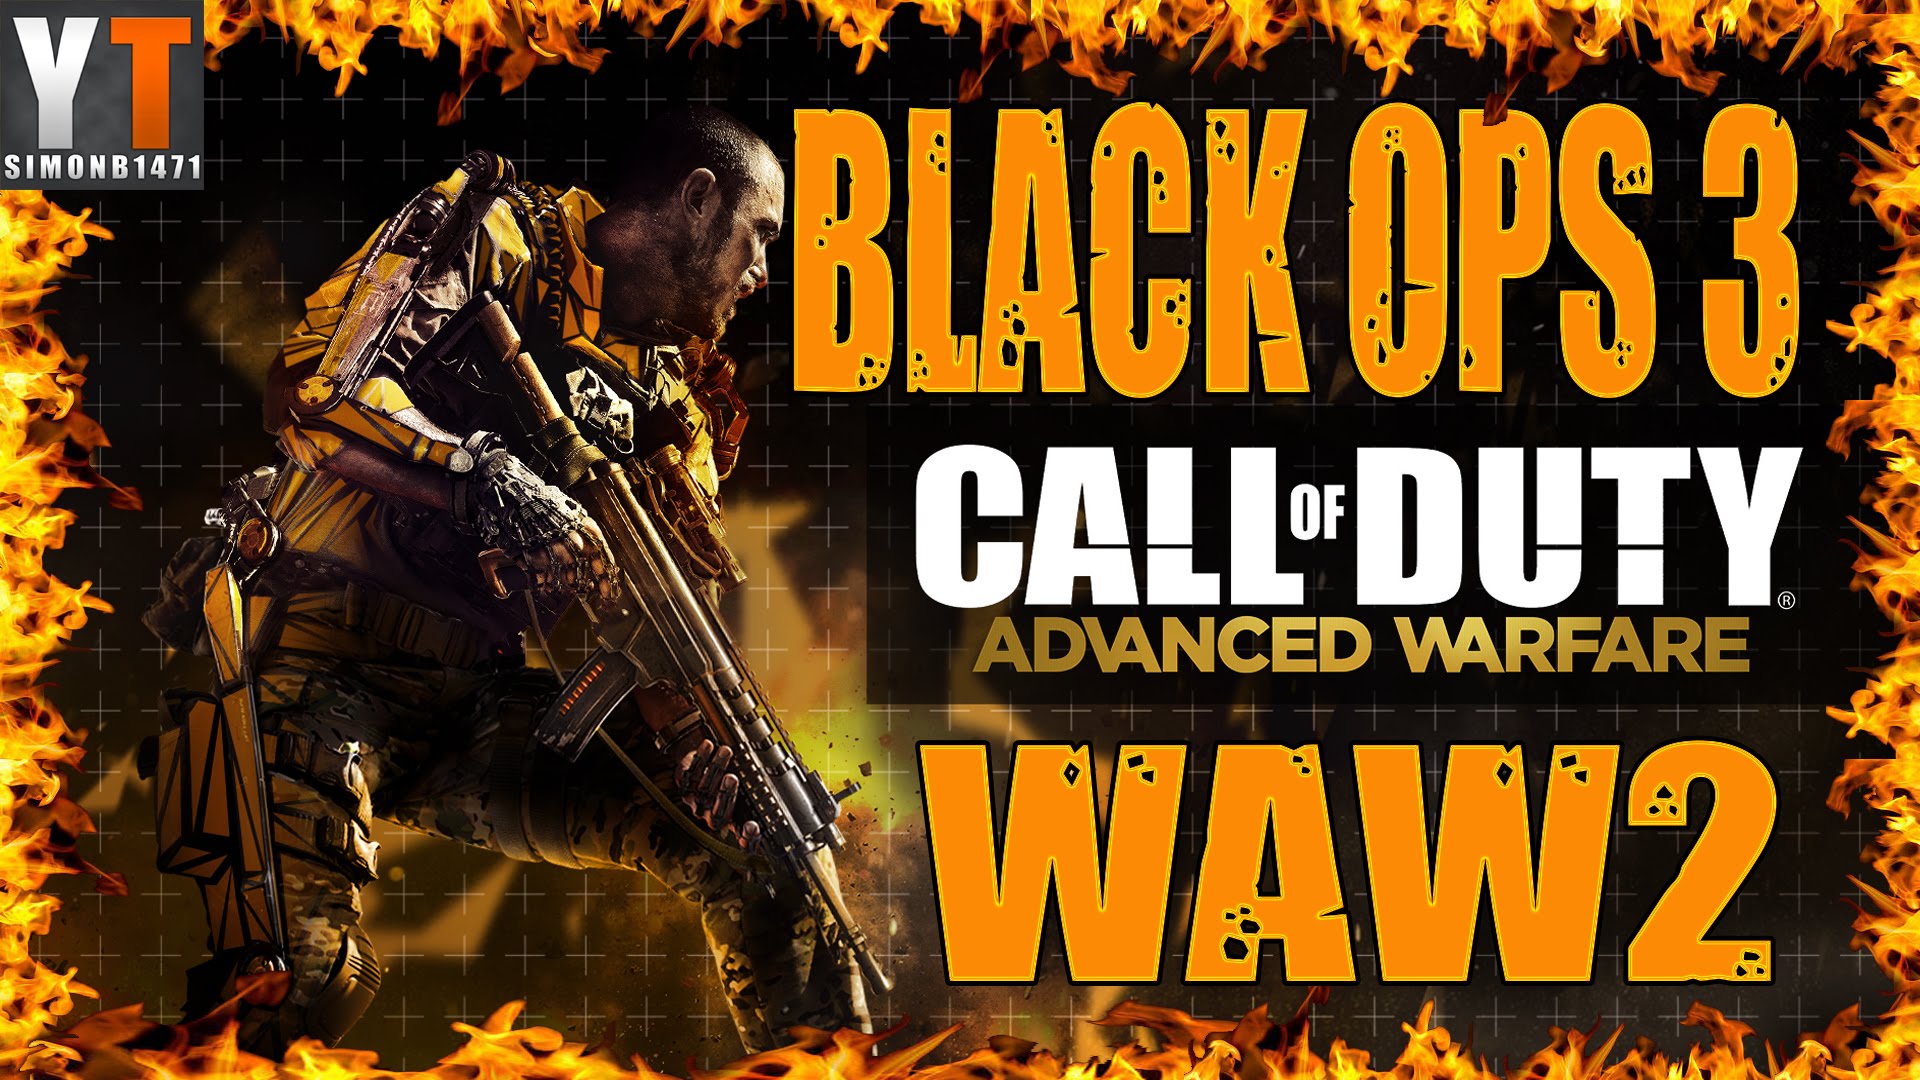 “Call of Duty” Black ops 3 or World at War 2, Which Game Would be Better (COD AW Multiplayer)